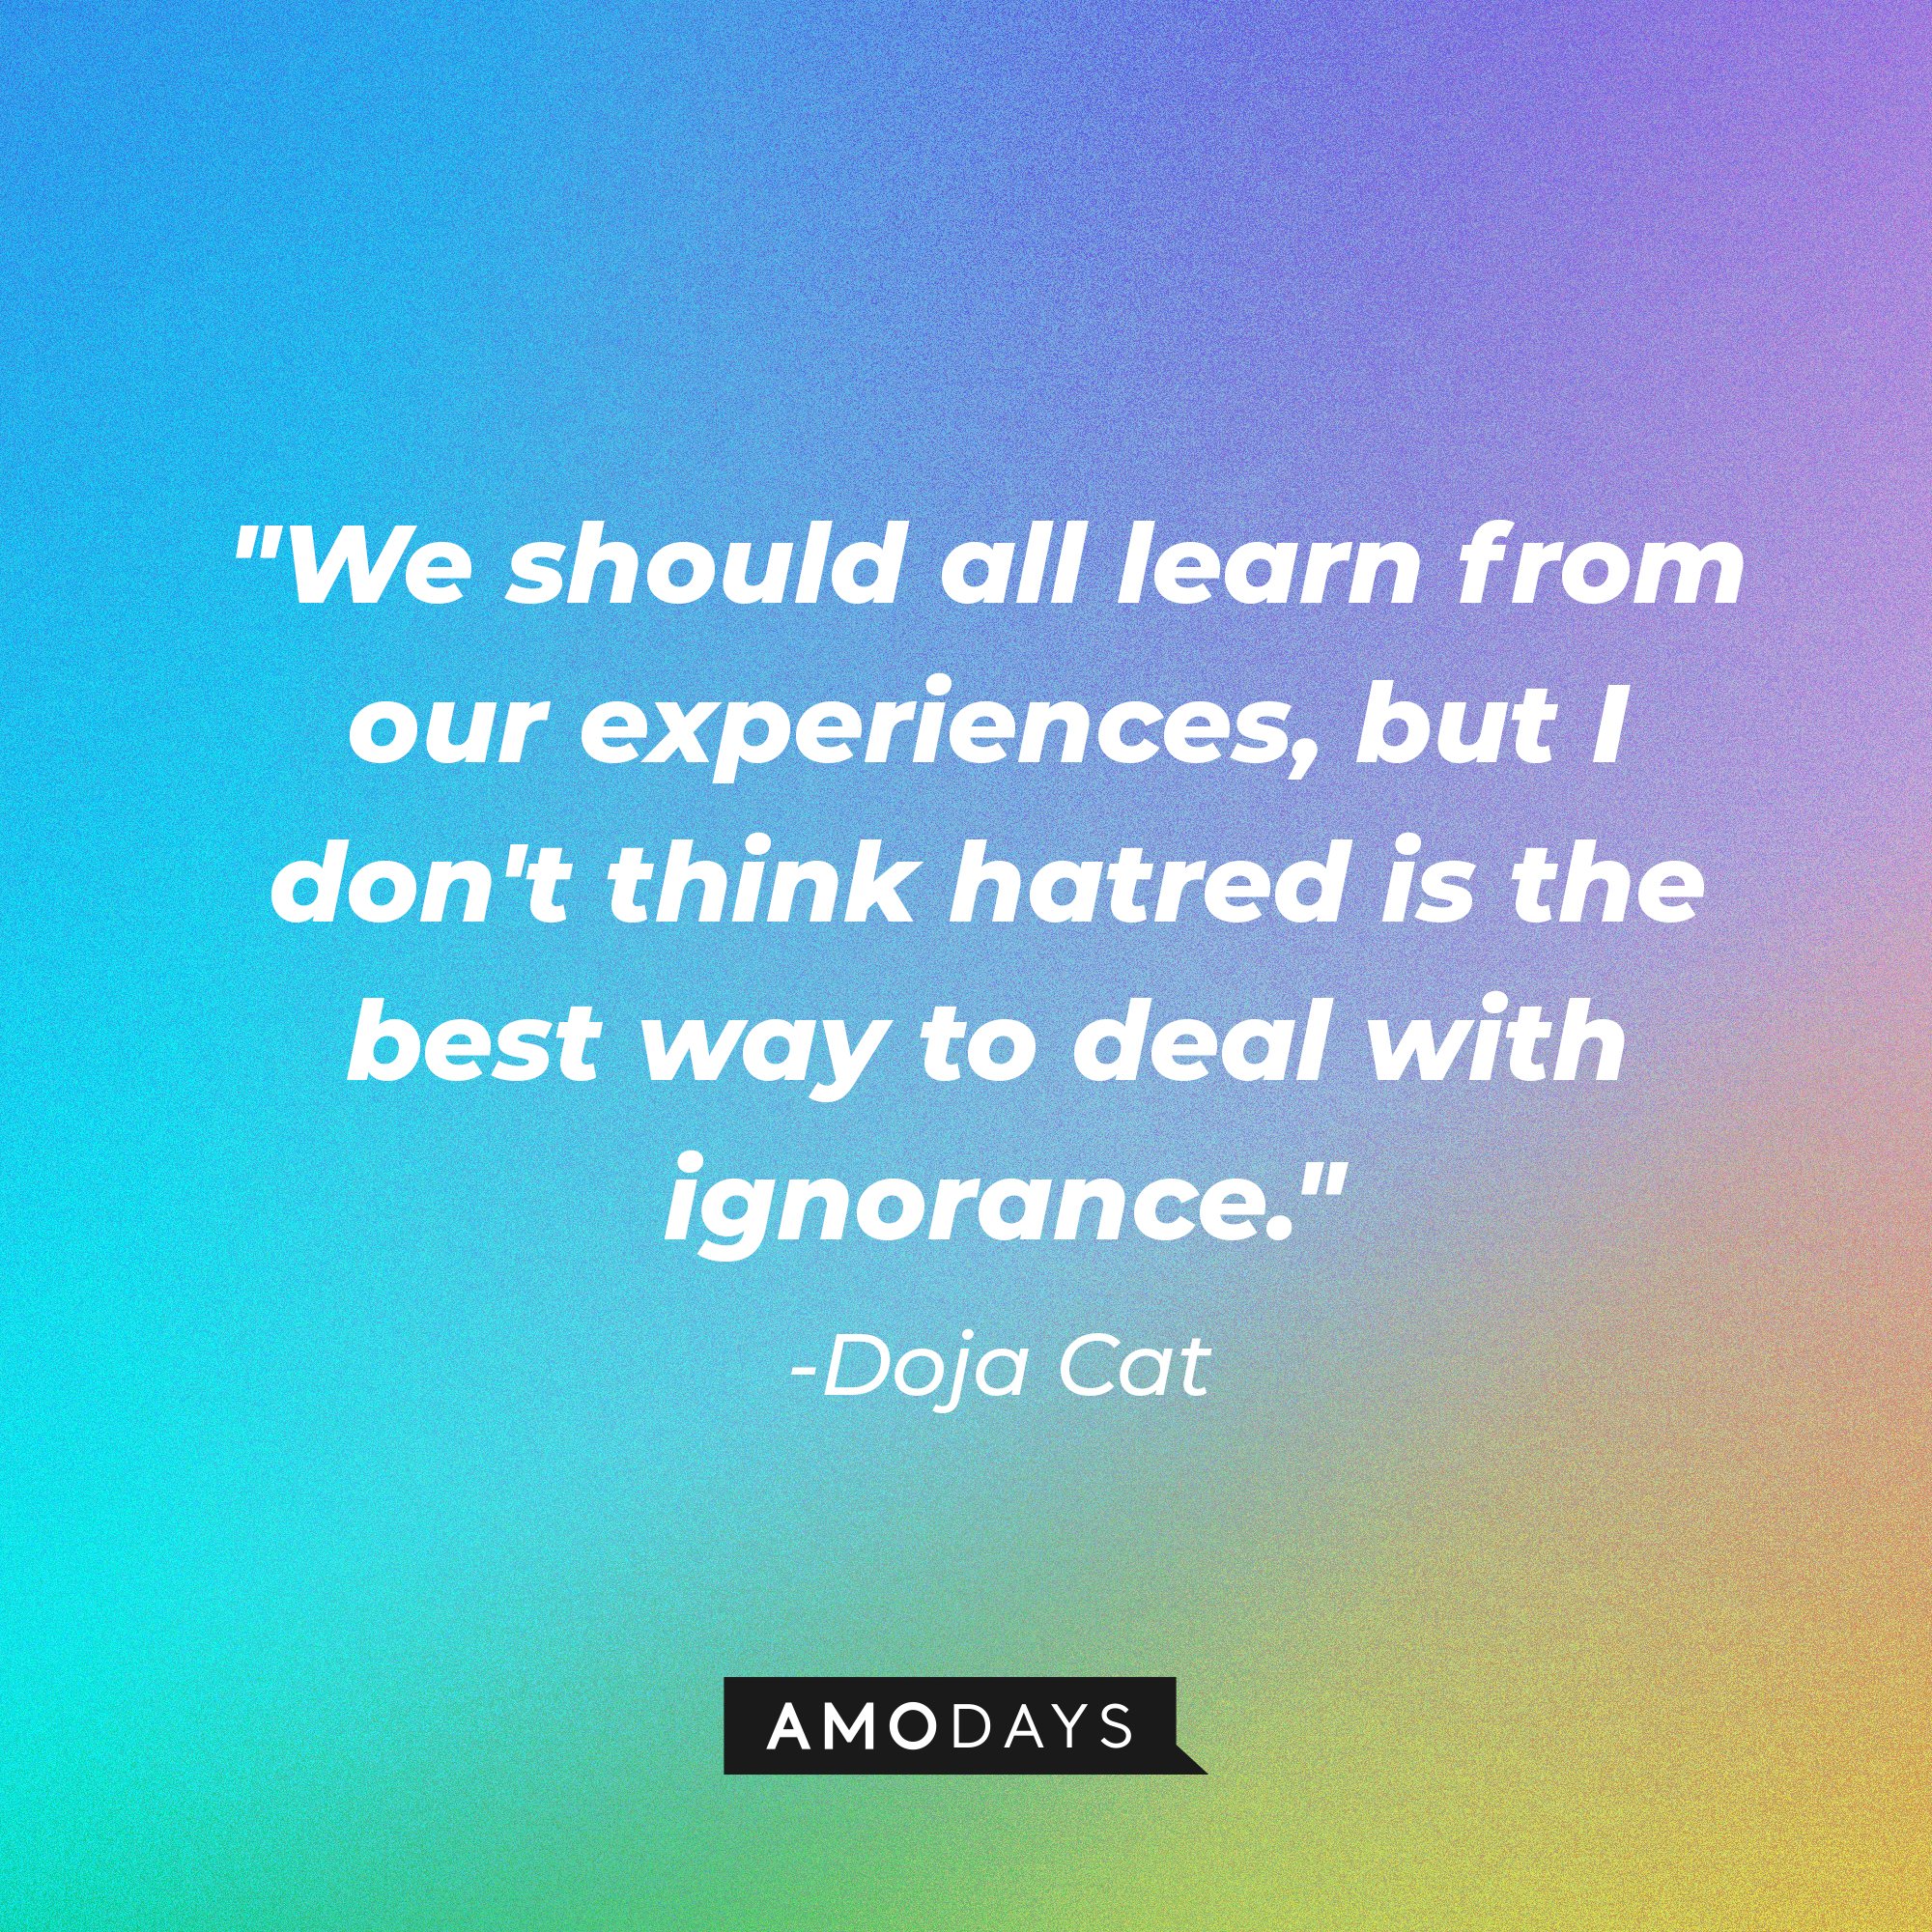 Doja Cat's quote: "We should all learn from our experiences, but I don't think hatred is the best way to deal with ignorance." | Image: AmoDays